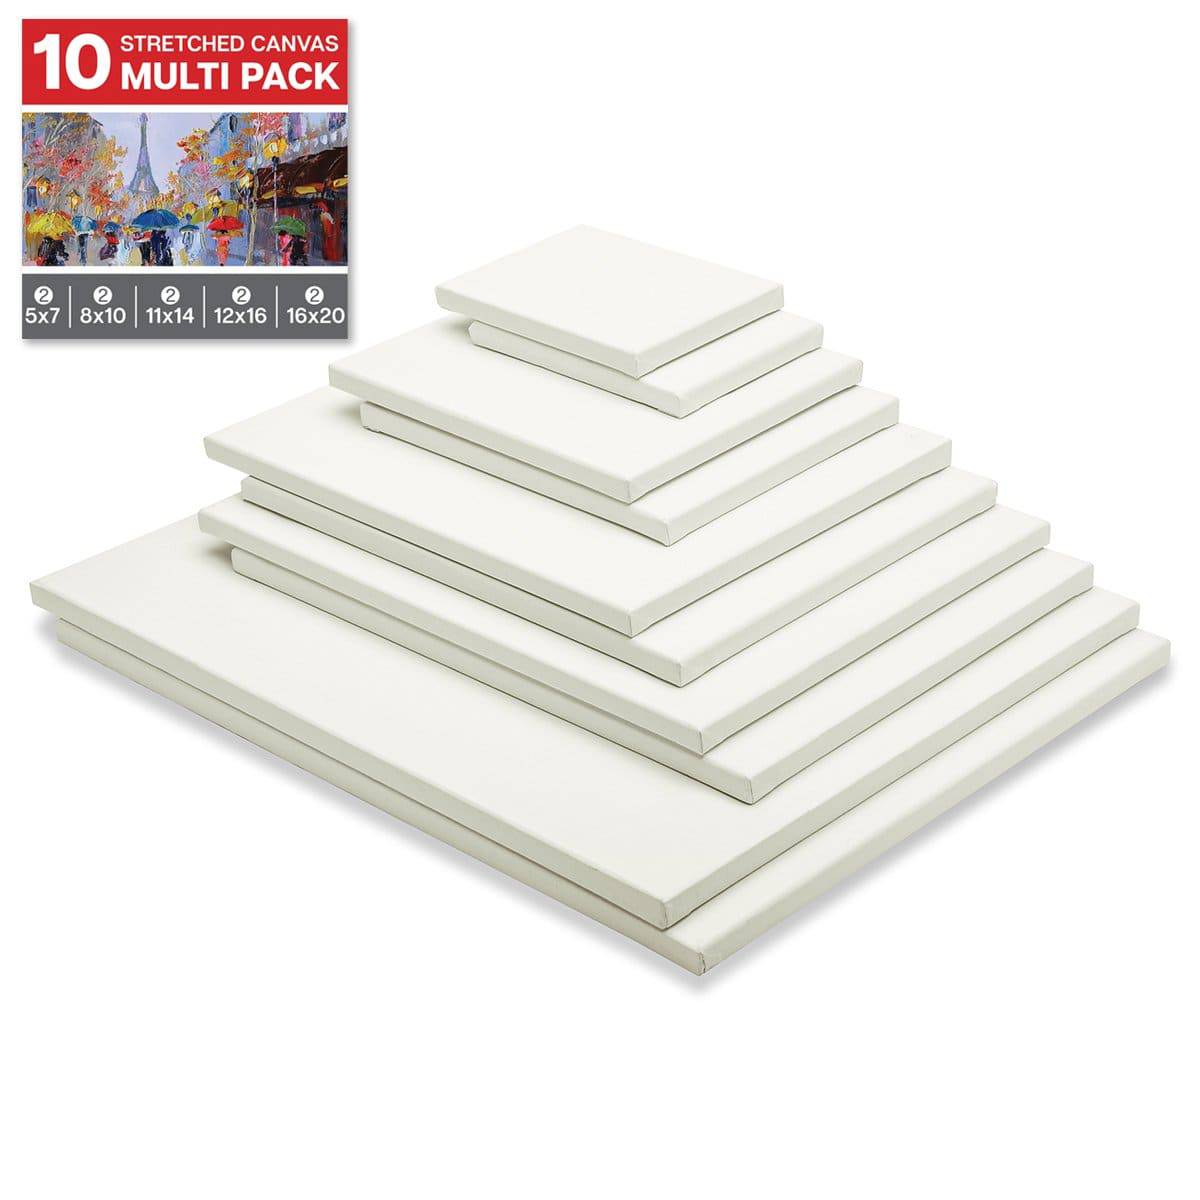 US Art Supply 8 x 10 inch Super Value Quality Acid Free Stretched Canvas 10-Pack